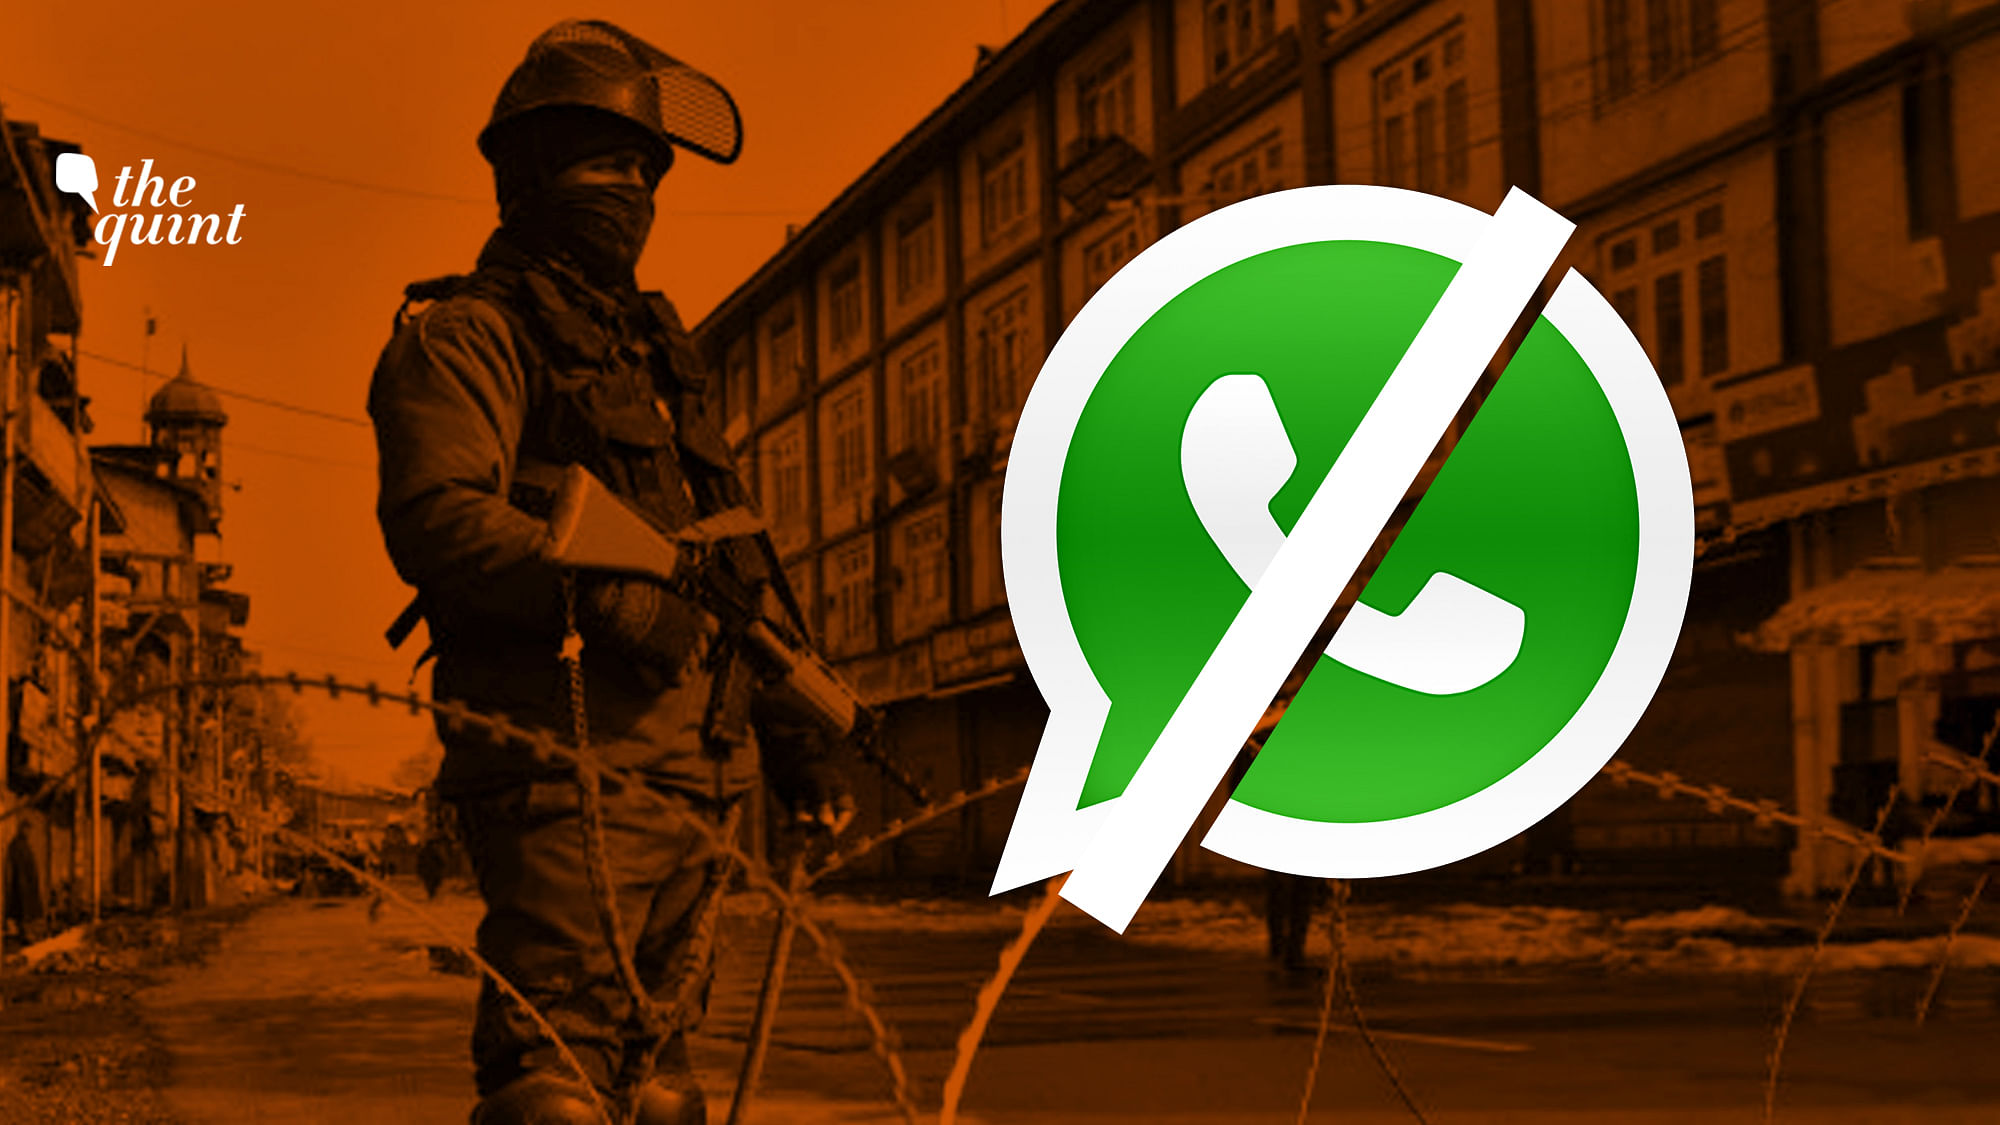 Unavailability of the Internet has meant thousands of WhatsApp users in Kashmir have been unable to access the messaging app, resulting in their accounts being deactivated.&nbsp;